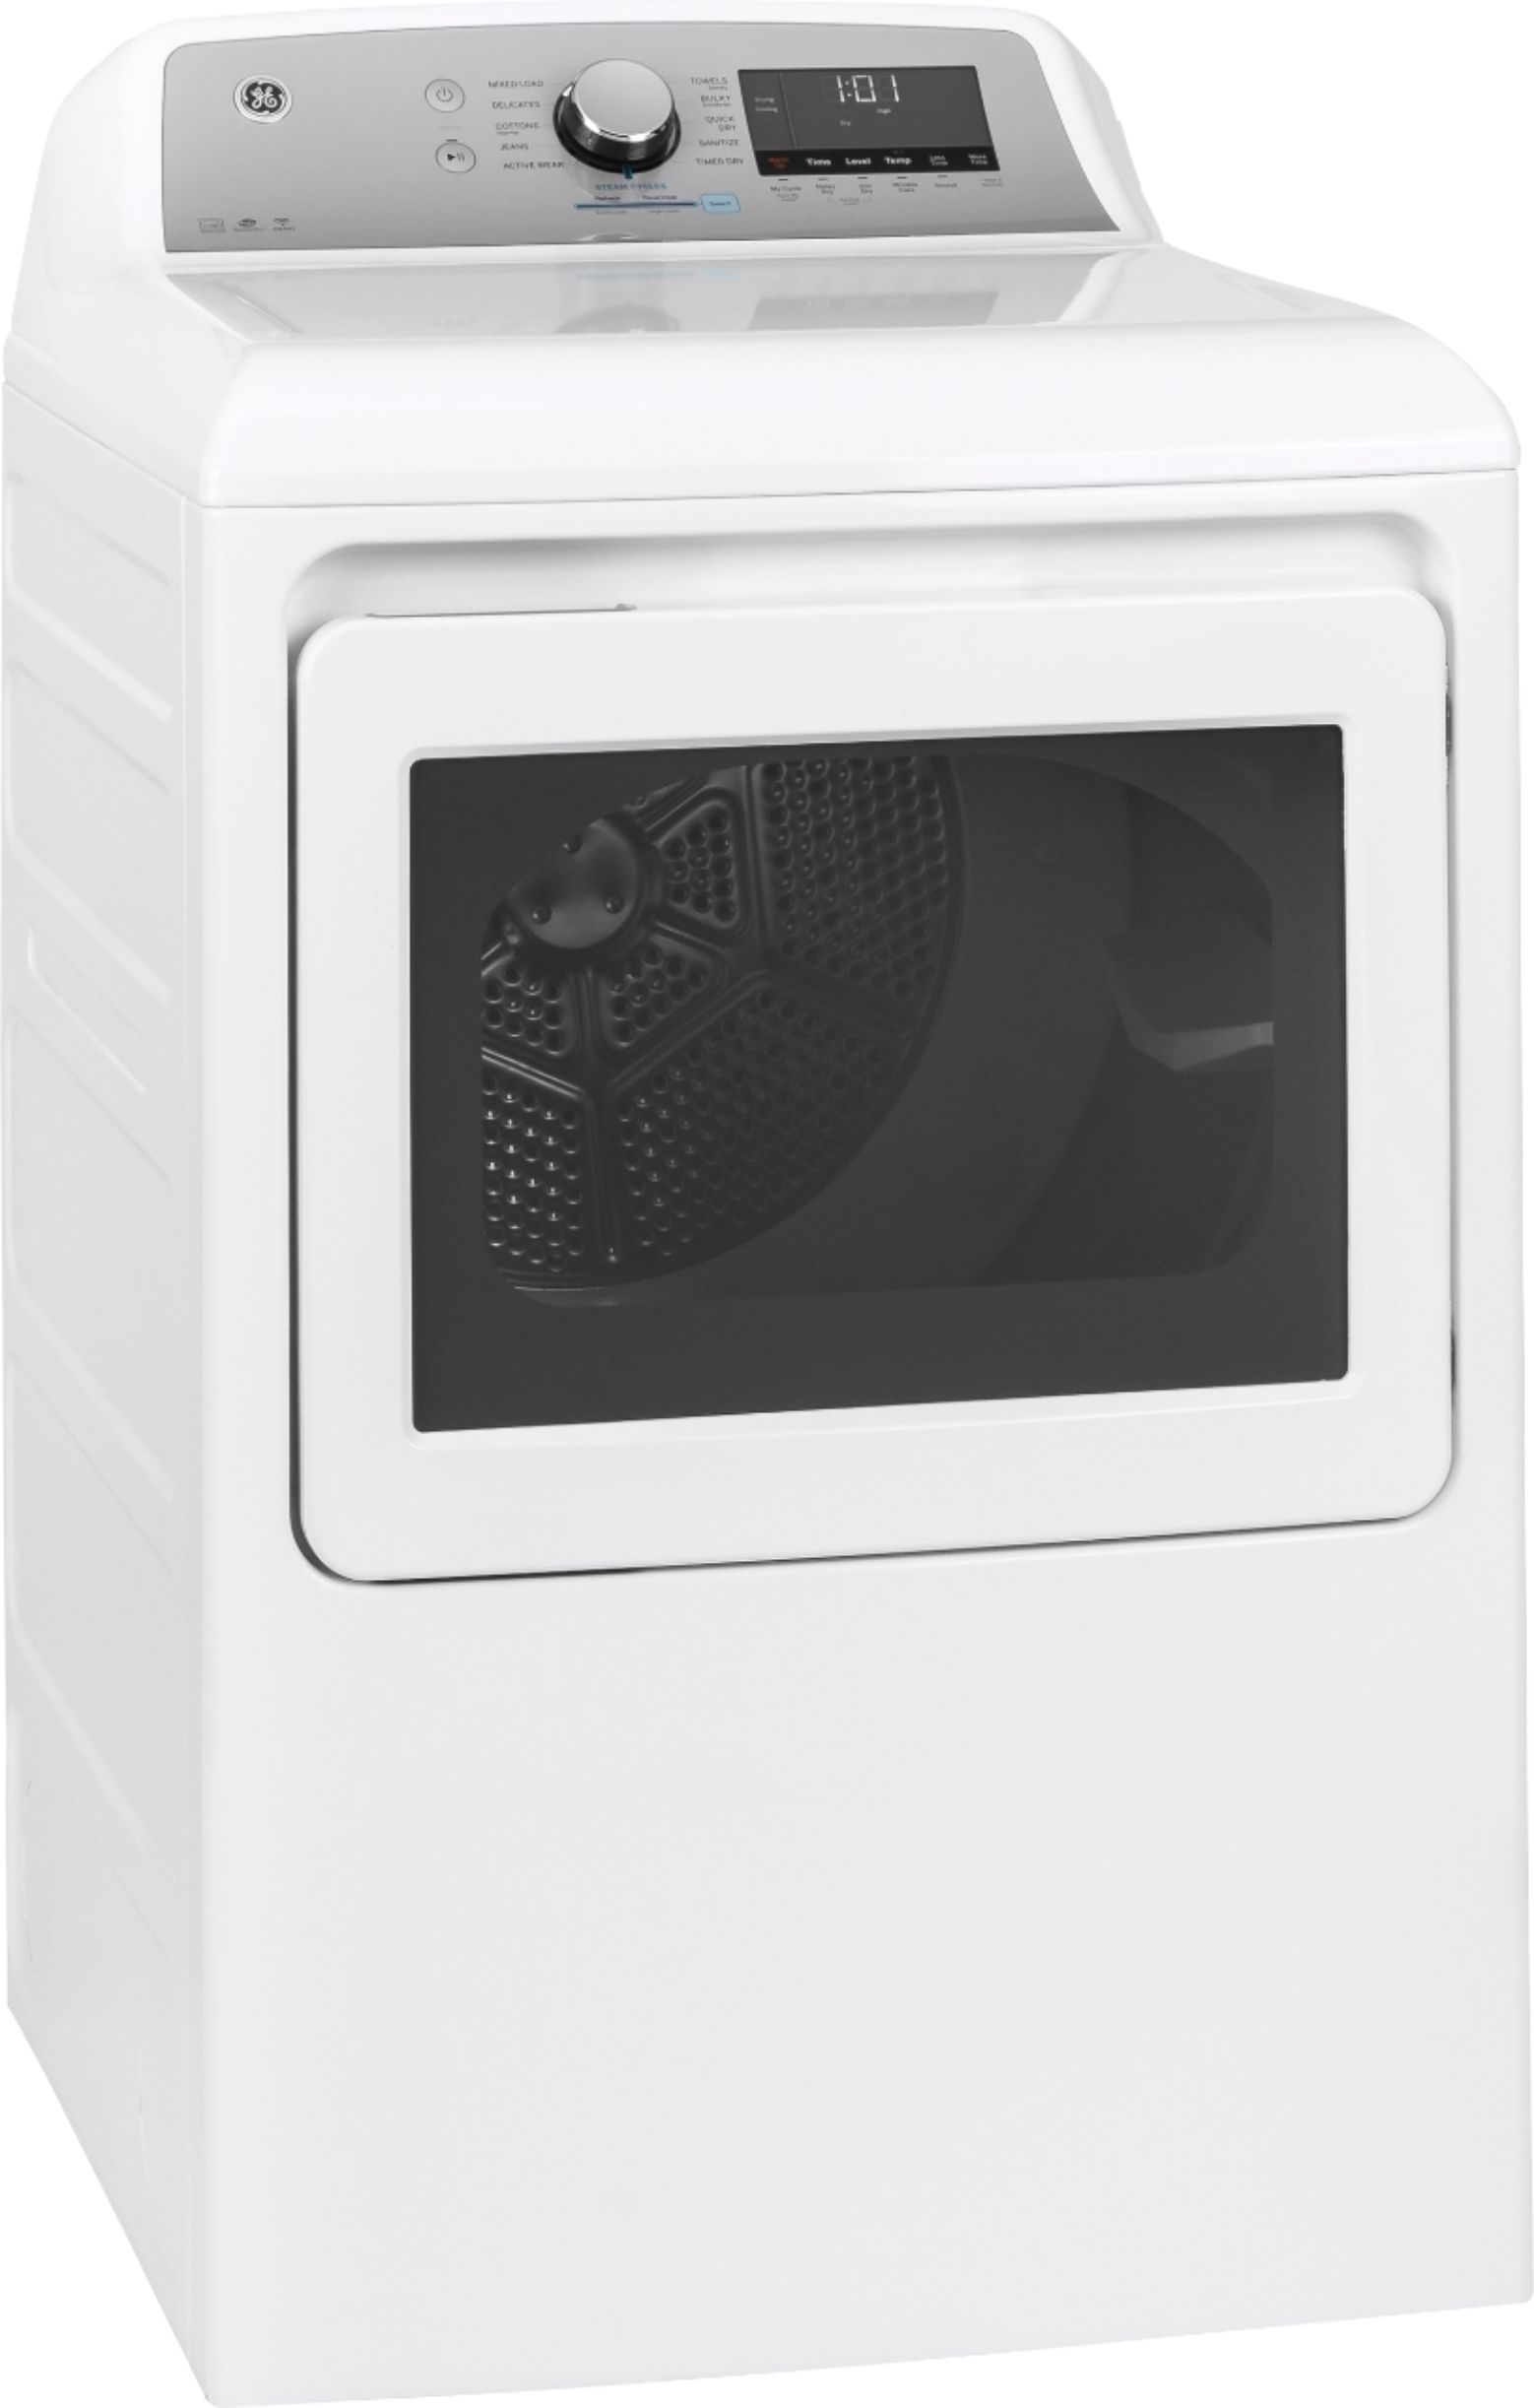 Angle View: GE - 7.4 Cu. Ft. 13-Cycle Electric Dryer with HE Sensor Dry - White on White/Silver Backsplash